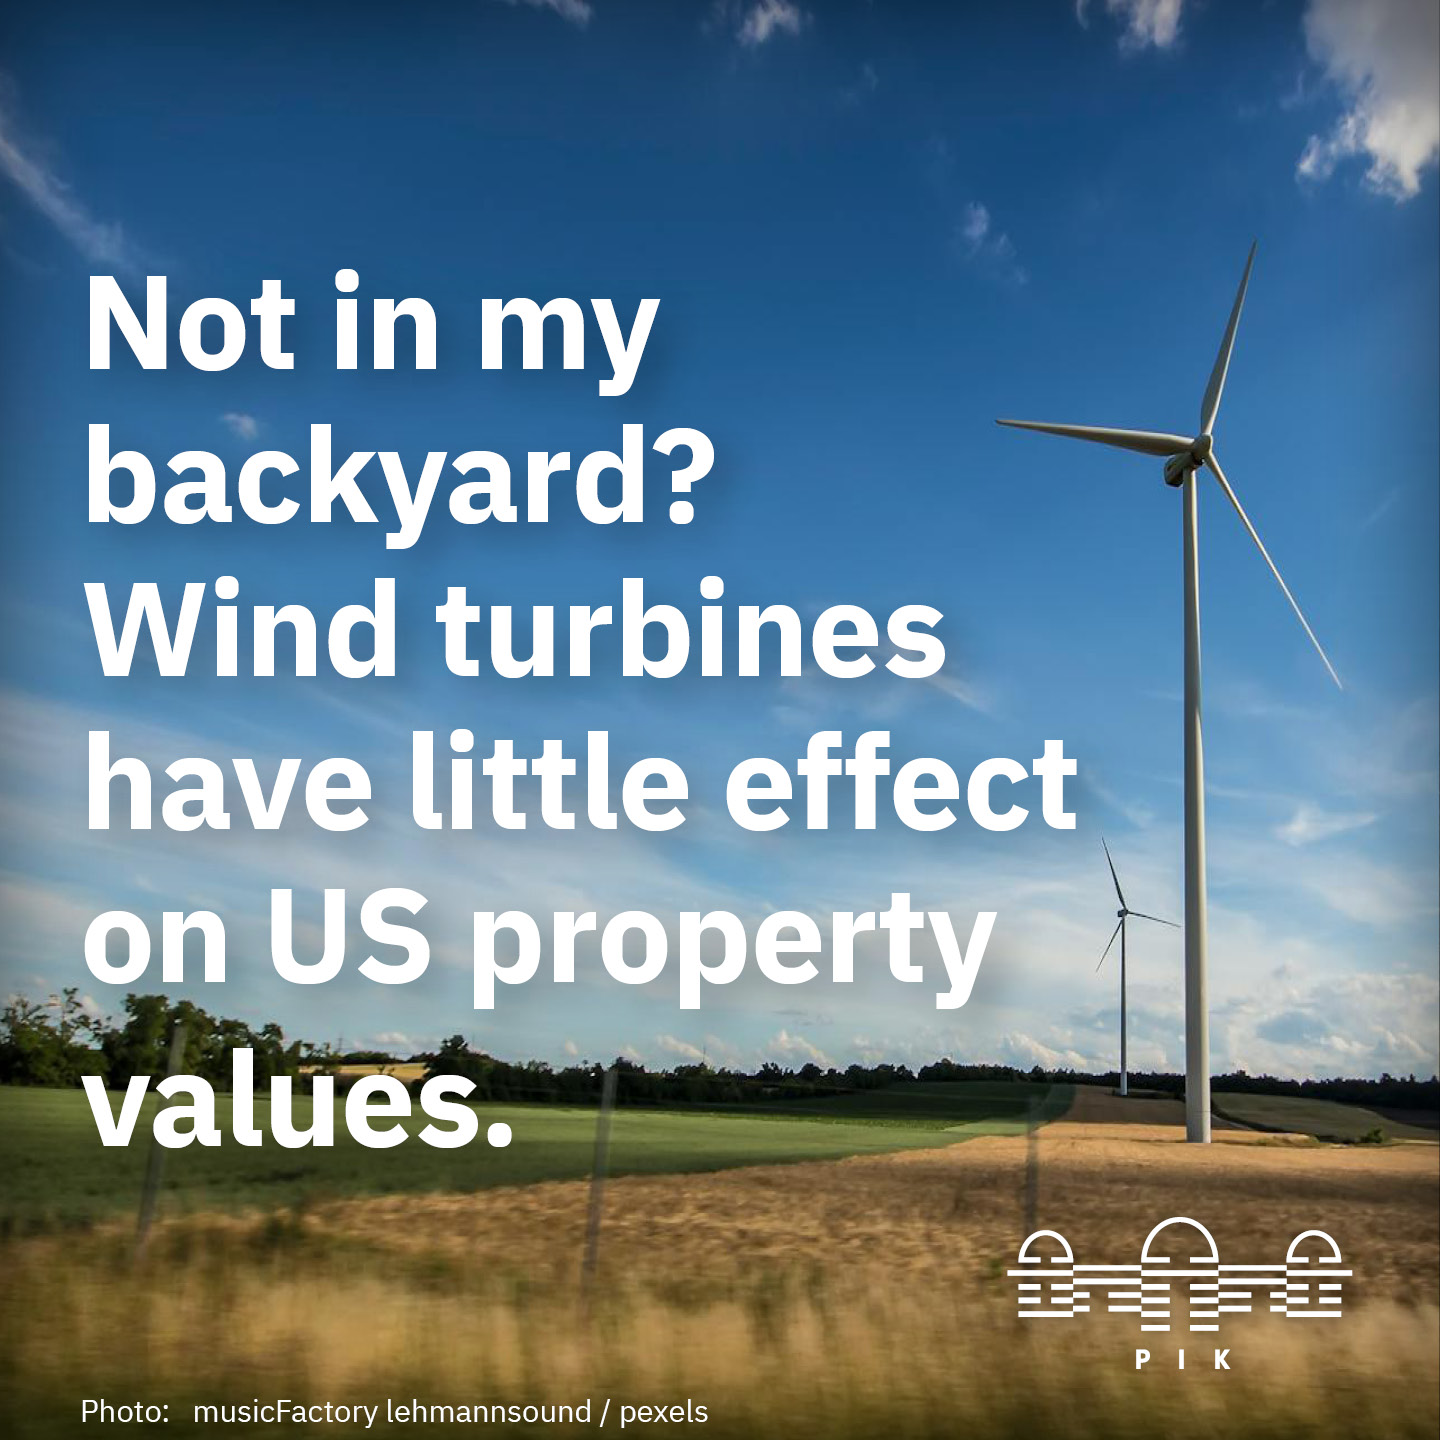 Not in my backyard? Wind turbines have little effect on US property values